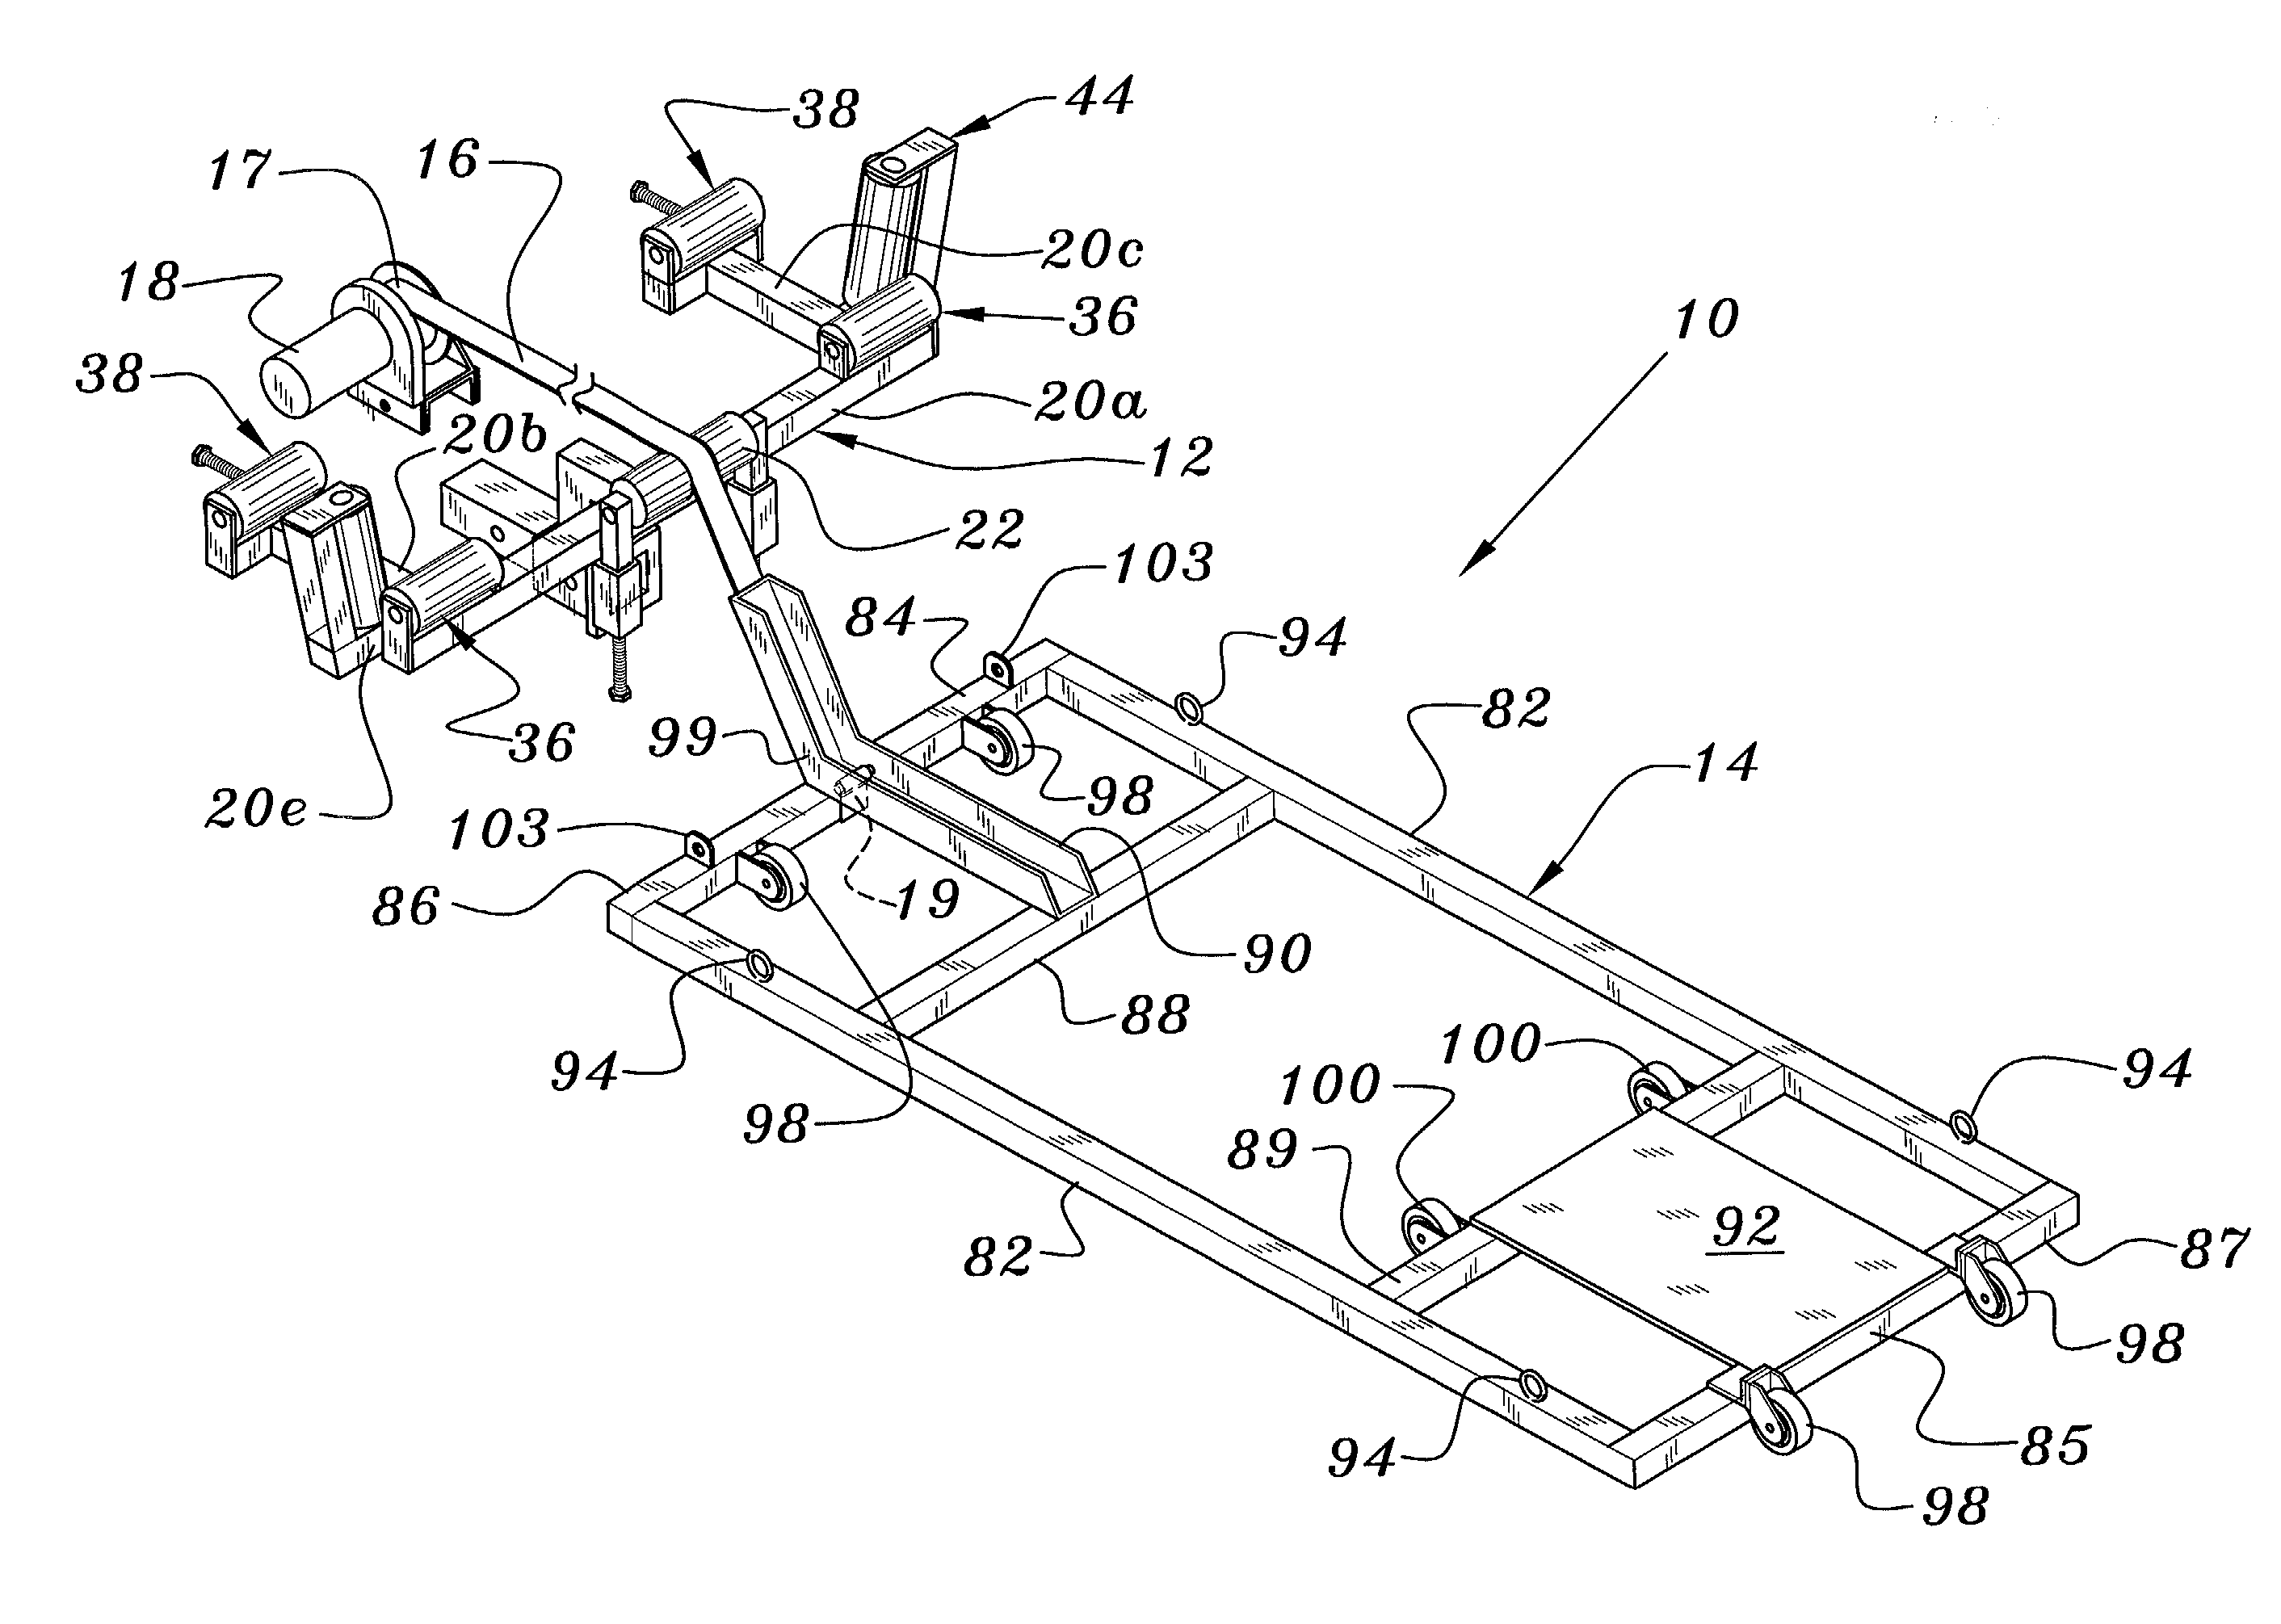 Apparatus for loading cargo into vehicles